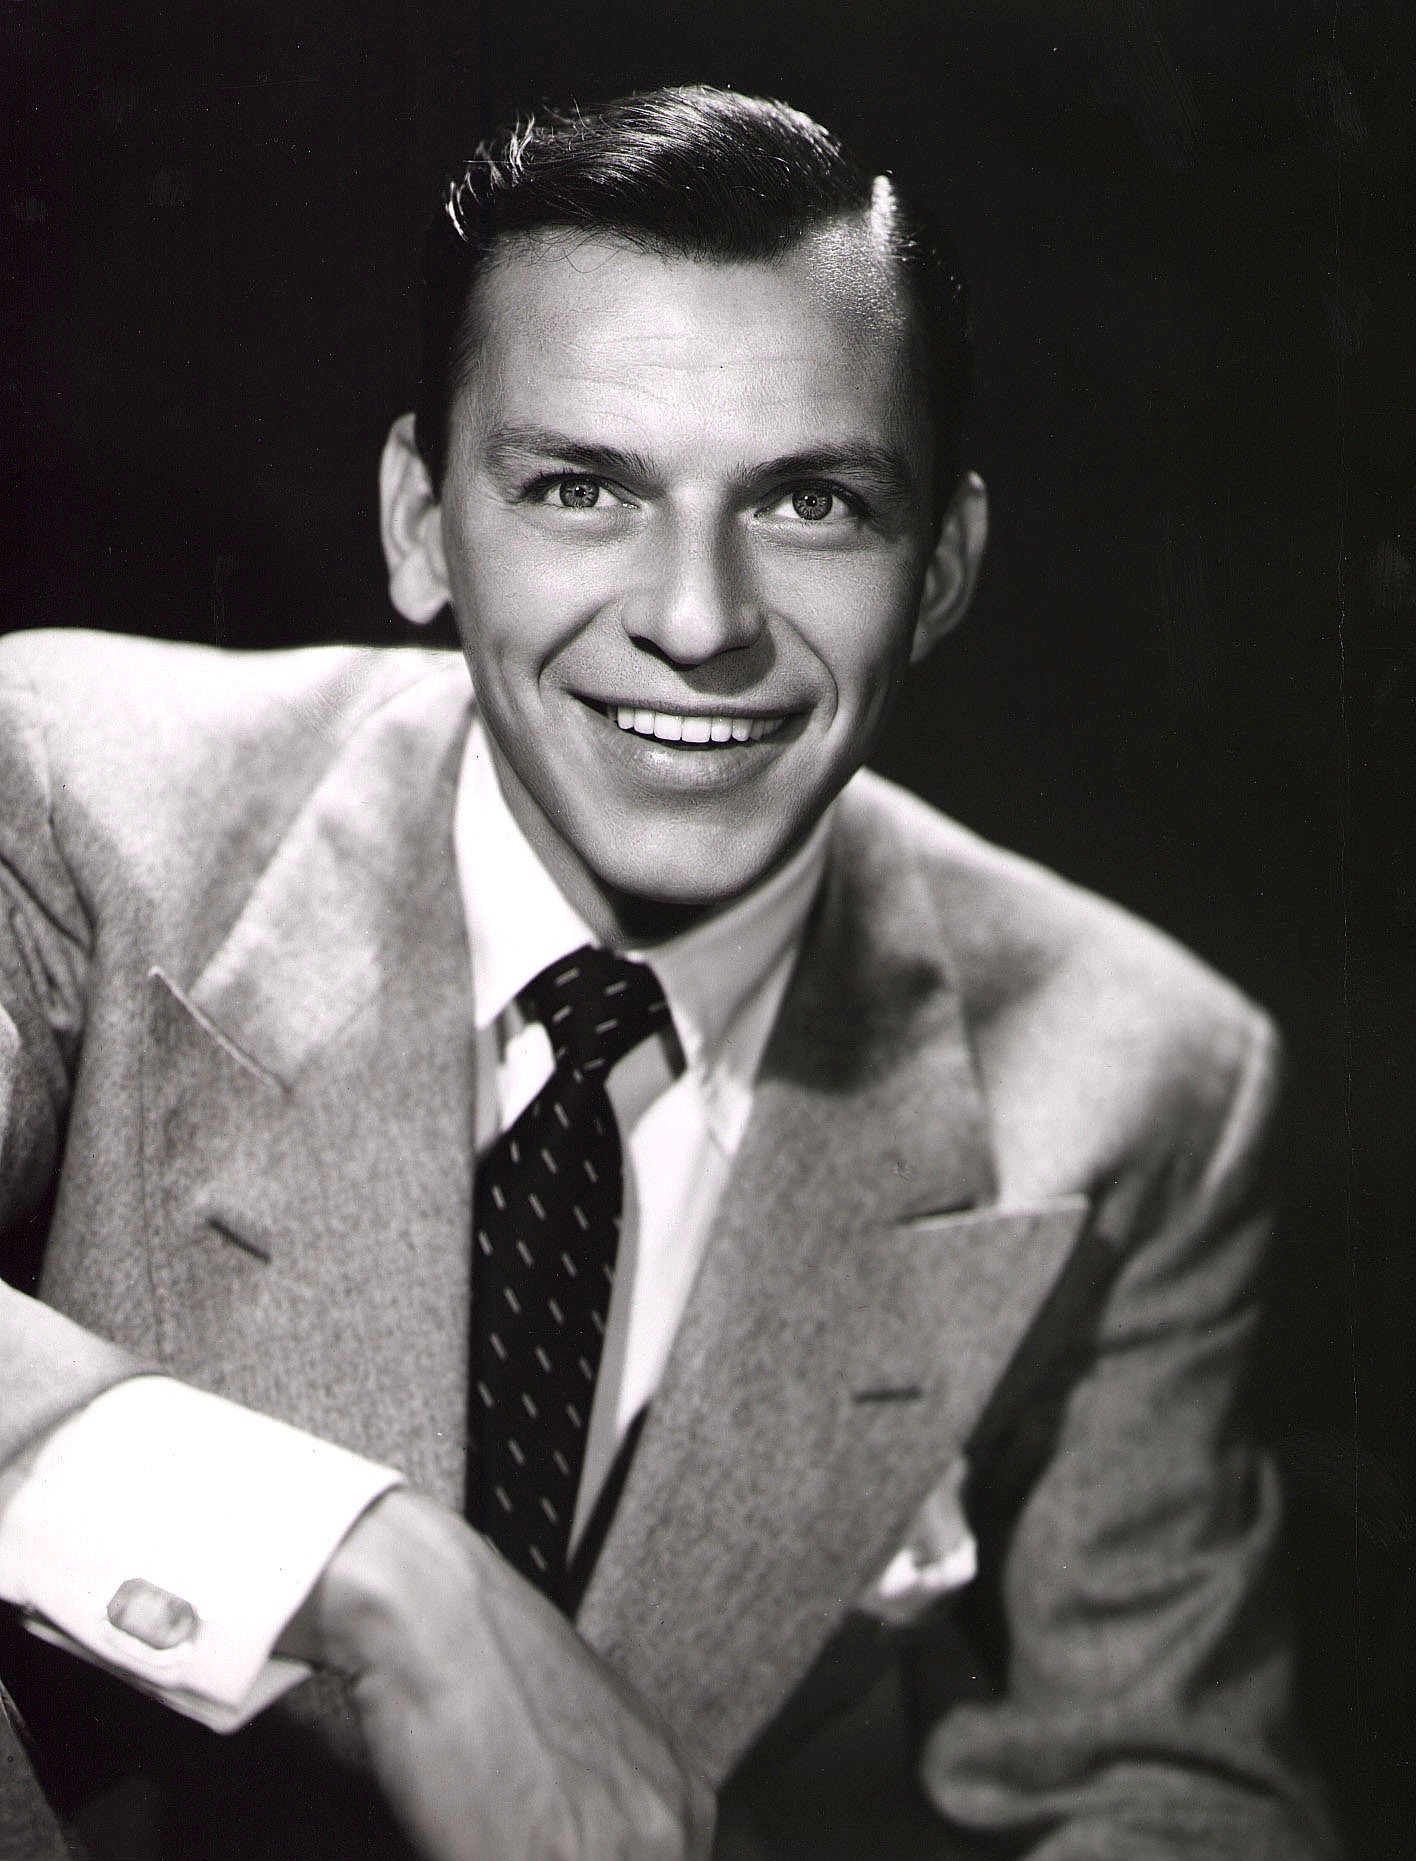 Promotional studio portrait of American singer and actor Frank Sinatra, 1950s. | Photo: GettyImages